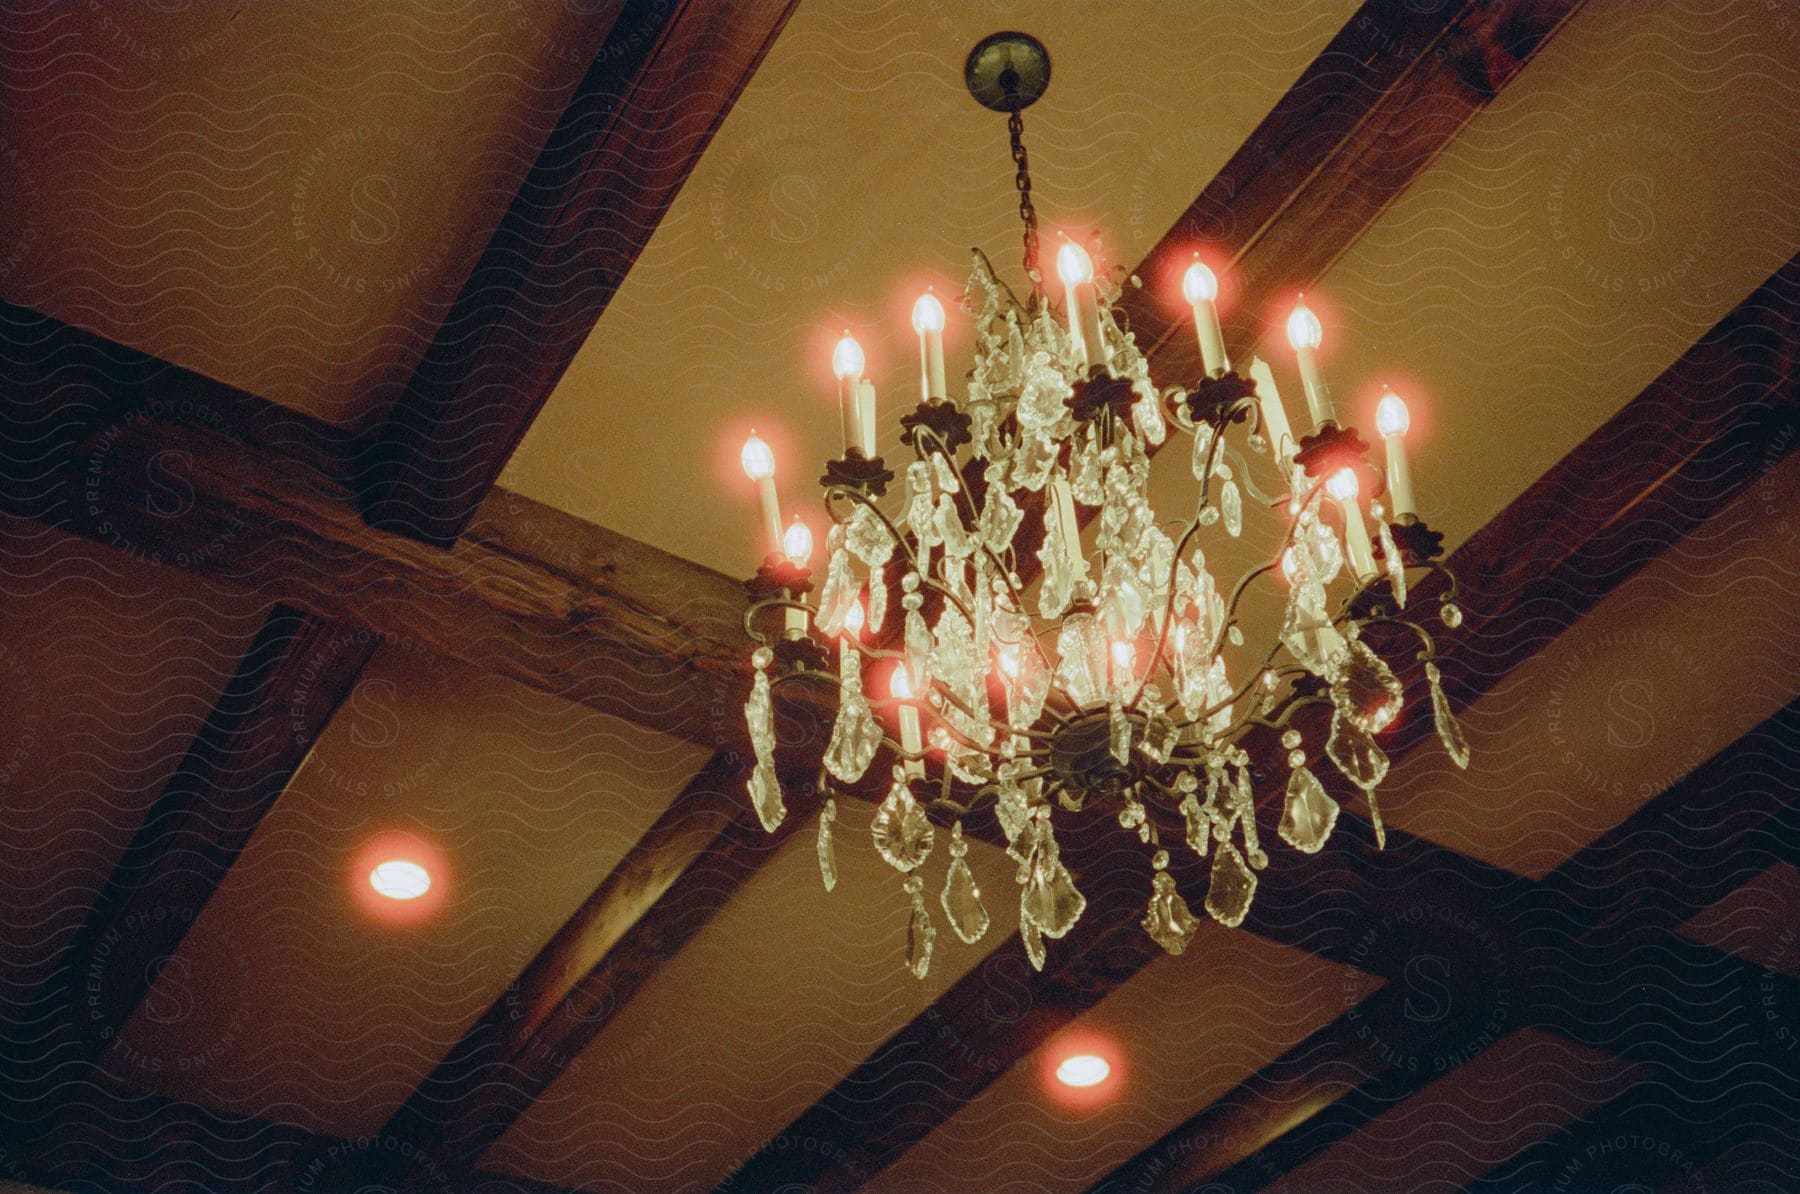 A chandelier is hanging from the ceiling.